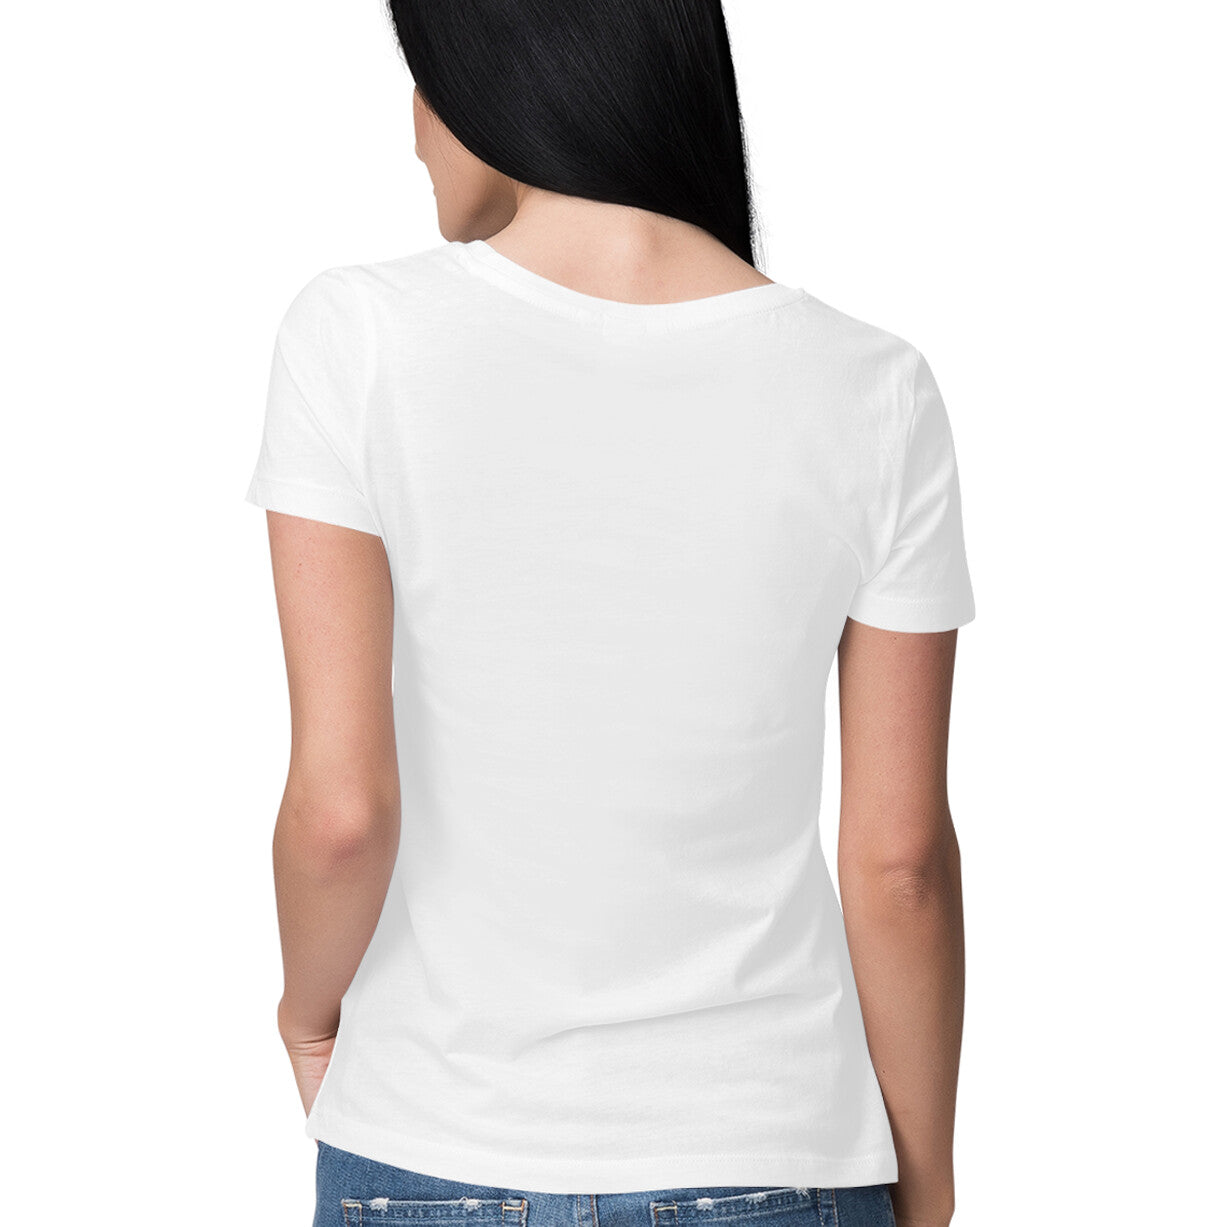 Swiss cheese Leaf T-shirt for women